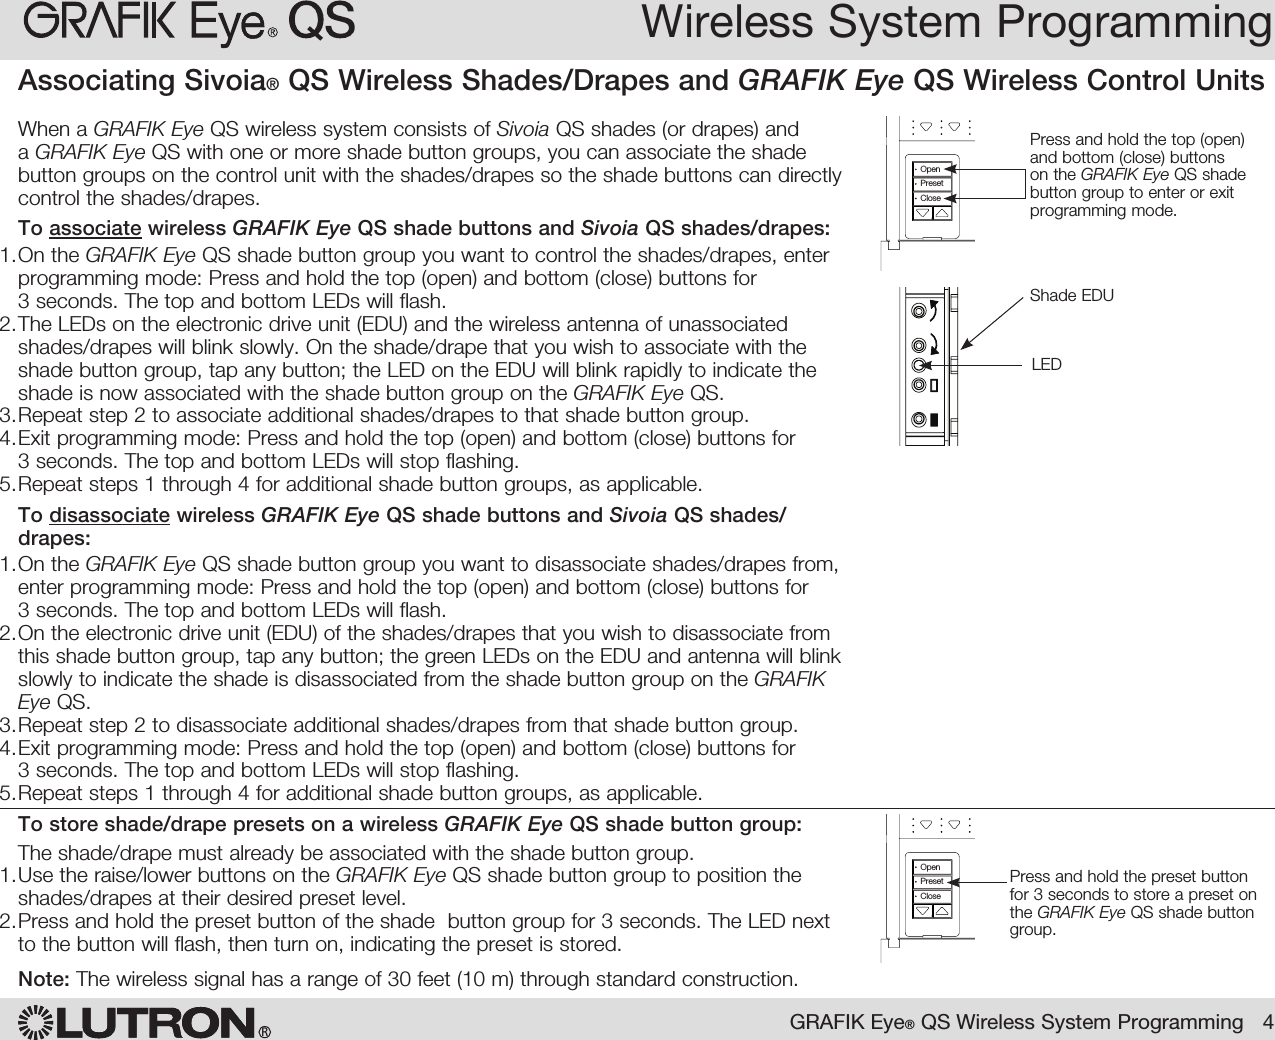 Wireless System ProgrammingRGRAFIK Eye® QS Wireless System Programming   4When a GRAFIK Eye QS wireless system consists of Sivoia QS shades (or drapes) and a GRAFIK Eye QS with one or more shade button groups, you can associate the shade button groups on the control unit with the shades/drapes so the shade buttons can directly control the shades/drapes.To associate wireless GRAFIK Eye QS shade buttons and Sivoia QS shades/drapes:1. On the GRAFIK Eye QS shade button group you want to control the shades/drapes, enter programming mode: Press and hold the top (open) and bottom (close) buttons for  3 seconds. The top and bottom LEDs will flash.2. The LEDs on the electronic drive unit (EDU) and the wireless antenna of unassociated shades/drapes will blink slowly. On the shade/drape that you wish to associate with the shade button group, tap any button; the LED on the EDU will blink rapidly to indicate the shade is now associated with the shade button group on the GRAFIK Eye QS.3. Repeat step 2 to associate additional shades/drapes to that shade button group.4. Exit programming mode: Press and hold the top (open) and bottom (close) buttons for  3 seconds. The top and bottom LEDs will stop flashing.5. Repeat steps 1 through 4 for additional shade button groups, as applicable.To disassociate wireless GRAFIK Eye QS shade buttons and Sivoia QS shades/drapes:1. On the GRAFIK Eye QS shade button group you want to disassociate shades/drapes from, enter programming mode: Press and hold the top (open) and bottom (close) buttons for  3 seconds. The top and bottom LEDs will flash.2. On the electronic drive unit (EDU) of the shades/drapes that you wish to disassociate from this shade button group, tap any button; the green LEDs on the EDU and antenna will blink slowly to indicate the shade is disassociated from the shade button group on the GRAFIK Eye QS.3. Repeat step 2 to disassociate additional shades/drapes from that shade button group.4. Exit programming mode: Press and hold the top (open) and bottom (close) buttons for  3 seconds. The top and bottom LEDs will stop flashing.5. Repeat steps 1 through 4 for additional shade button groups, as applicable.To store shade/drape presets on a wireless GRAFIK Eye QS shade button group:The shade/drape must already be associated with the shade button group.1. Use the raise/lower buttons on the GRAFIK Eye QS shade button group to position the shades/drapes at their desired preset level.2. Press and hold the preset button of the shade  button group for 3 seconds. The LED next to the button will flash, then turn on, indicating the preset is stored.Note: The wireless signal has a range of 30 feet (10 m) through standard construction.Associating Sivoia® QS Wireless Shades/Drapes and GRAFIK Eye QS Wireless Control Units Press and hold the top (open) and bottom (close) buttons on the GRAFIK Eye QS shade button group to enter or exit programming mode.OK1 2 3 4 5 6OpenPresetClosePress and hold the preset button for 3 seconds to store a preset on the GRAFIK Eye QS shade button group.OK1 2 3 4 5 6OpenPresetCloseShade EDULED